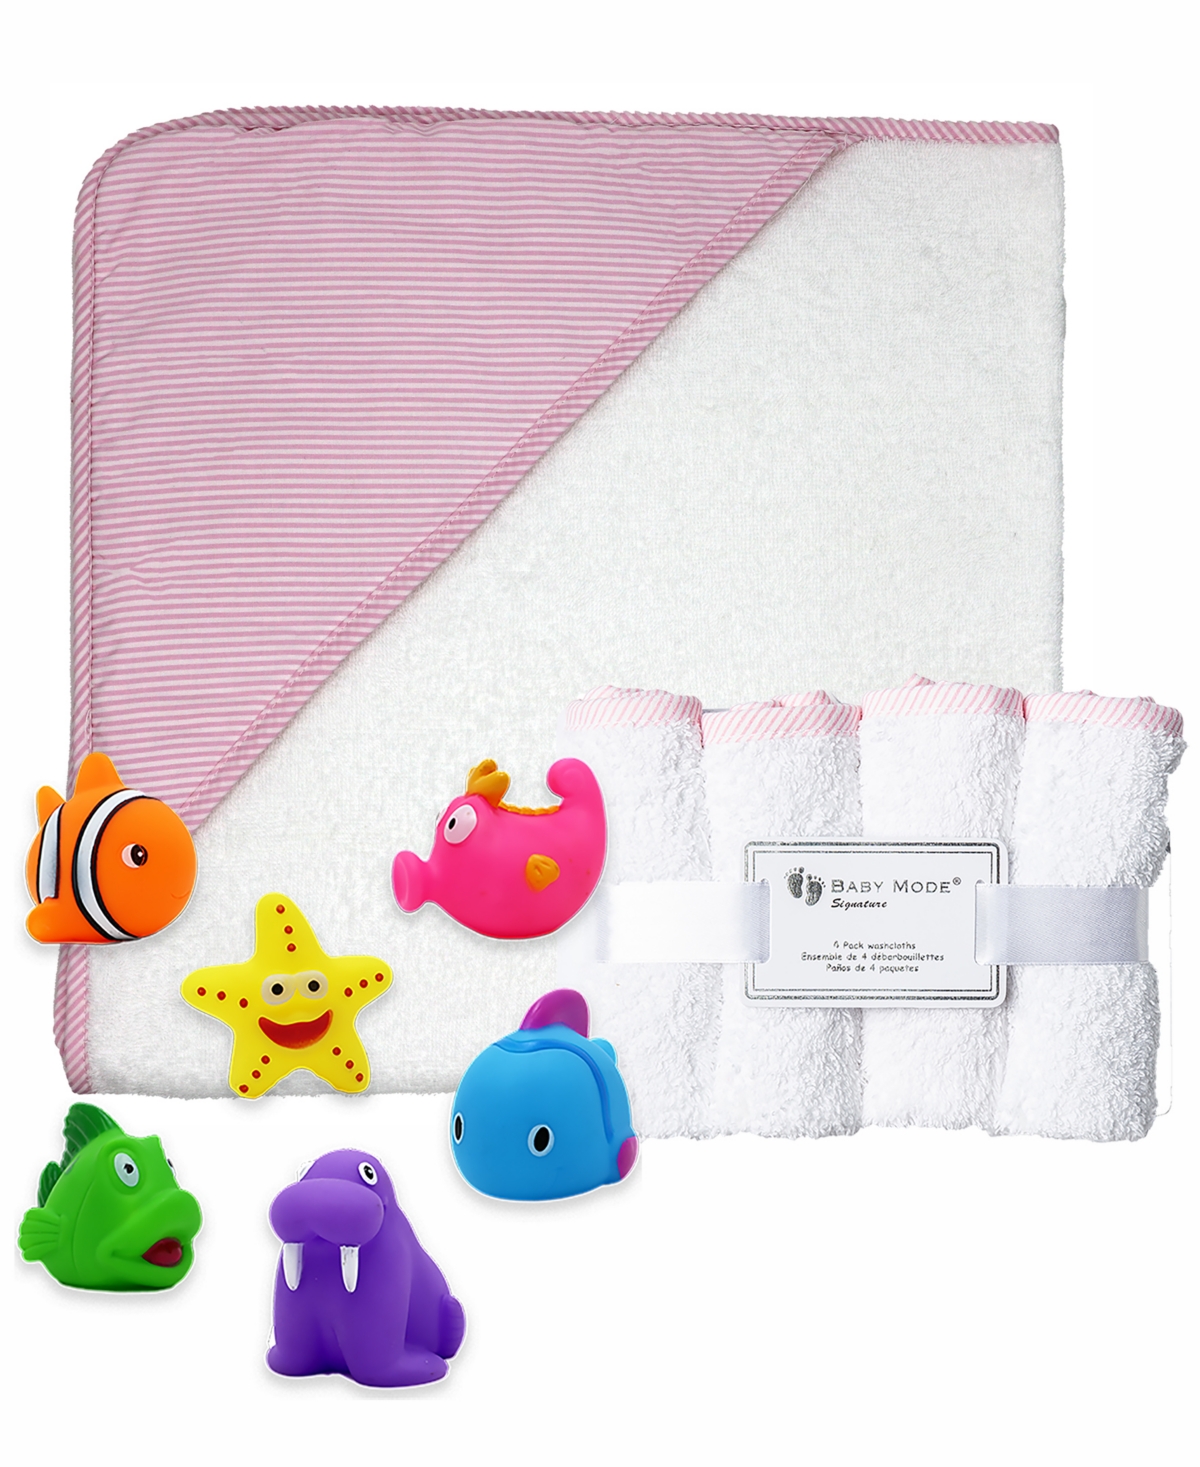 Baby Mode Signature Baby Girls Towel, Washcloth, And Toys, 9 Piece Set In Pink